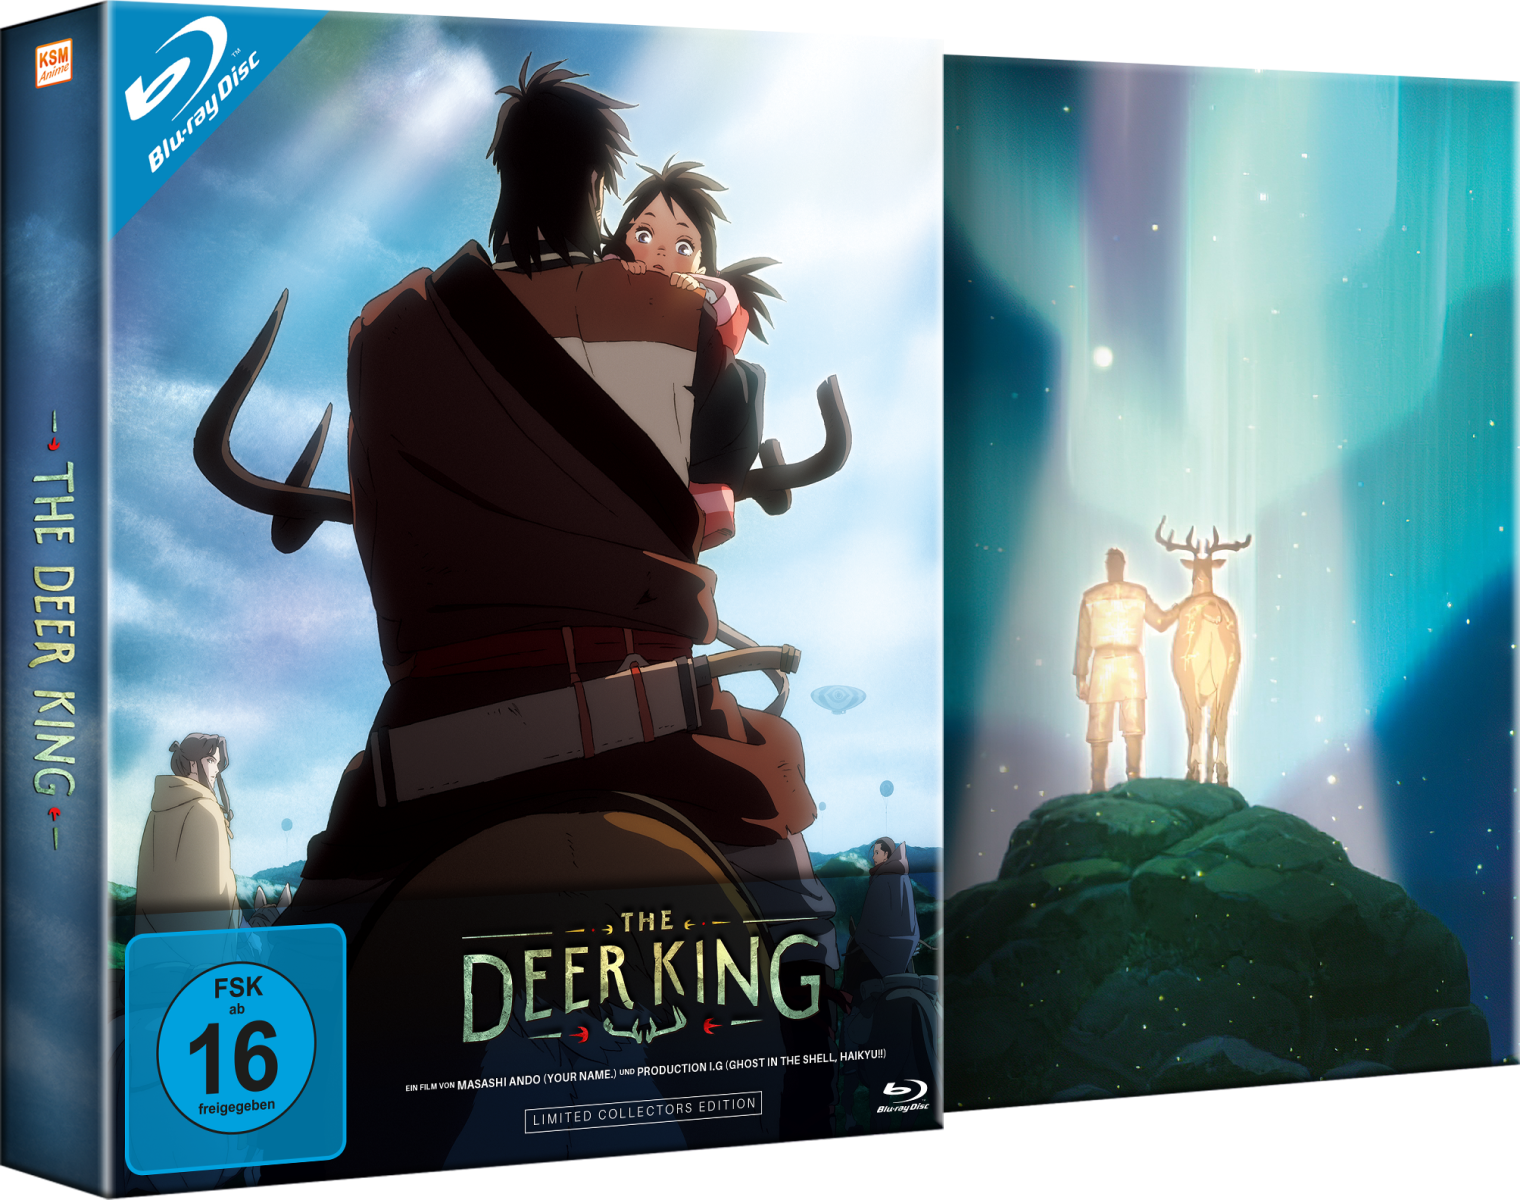 The Deer King - Limited Collector's Edition [DVD+Blu-ray] Image 2